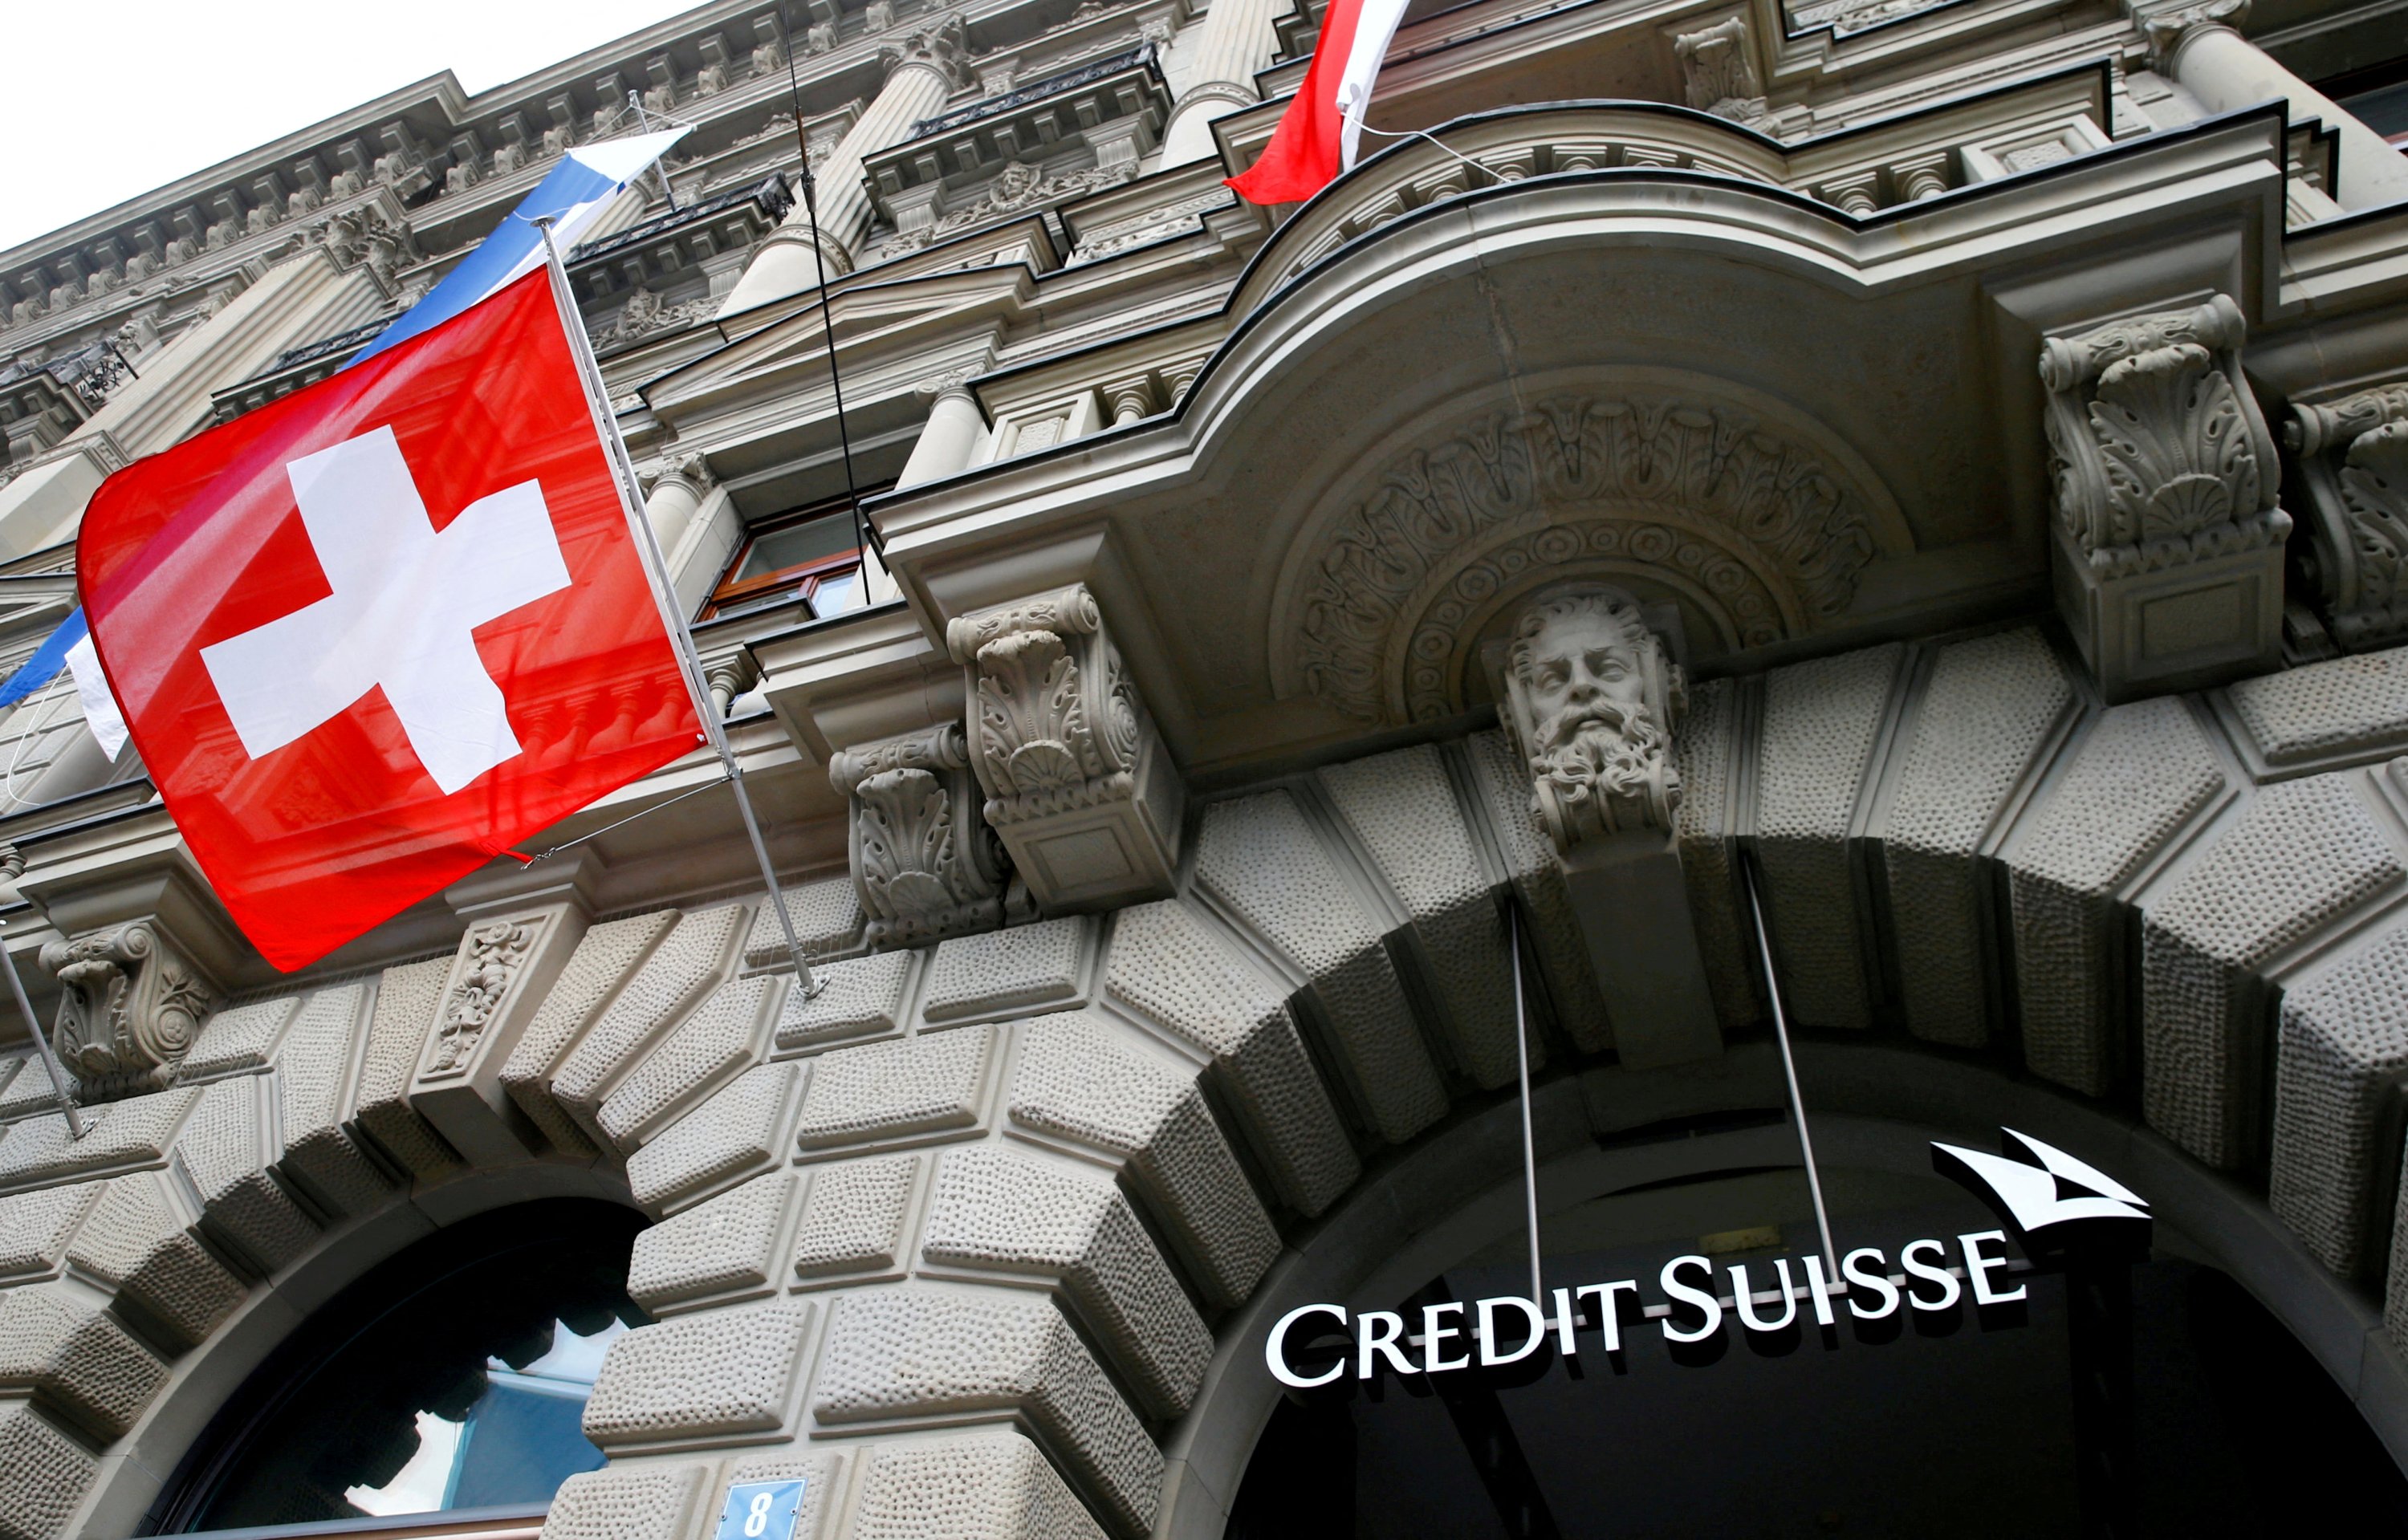 Credit Suisse collapsed in 2023 and was taken over by UBS in a rescue orchestrated by Swiss authorities. 

Image Source: Daily Sabah 